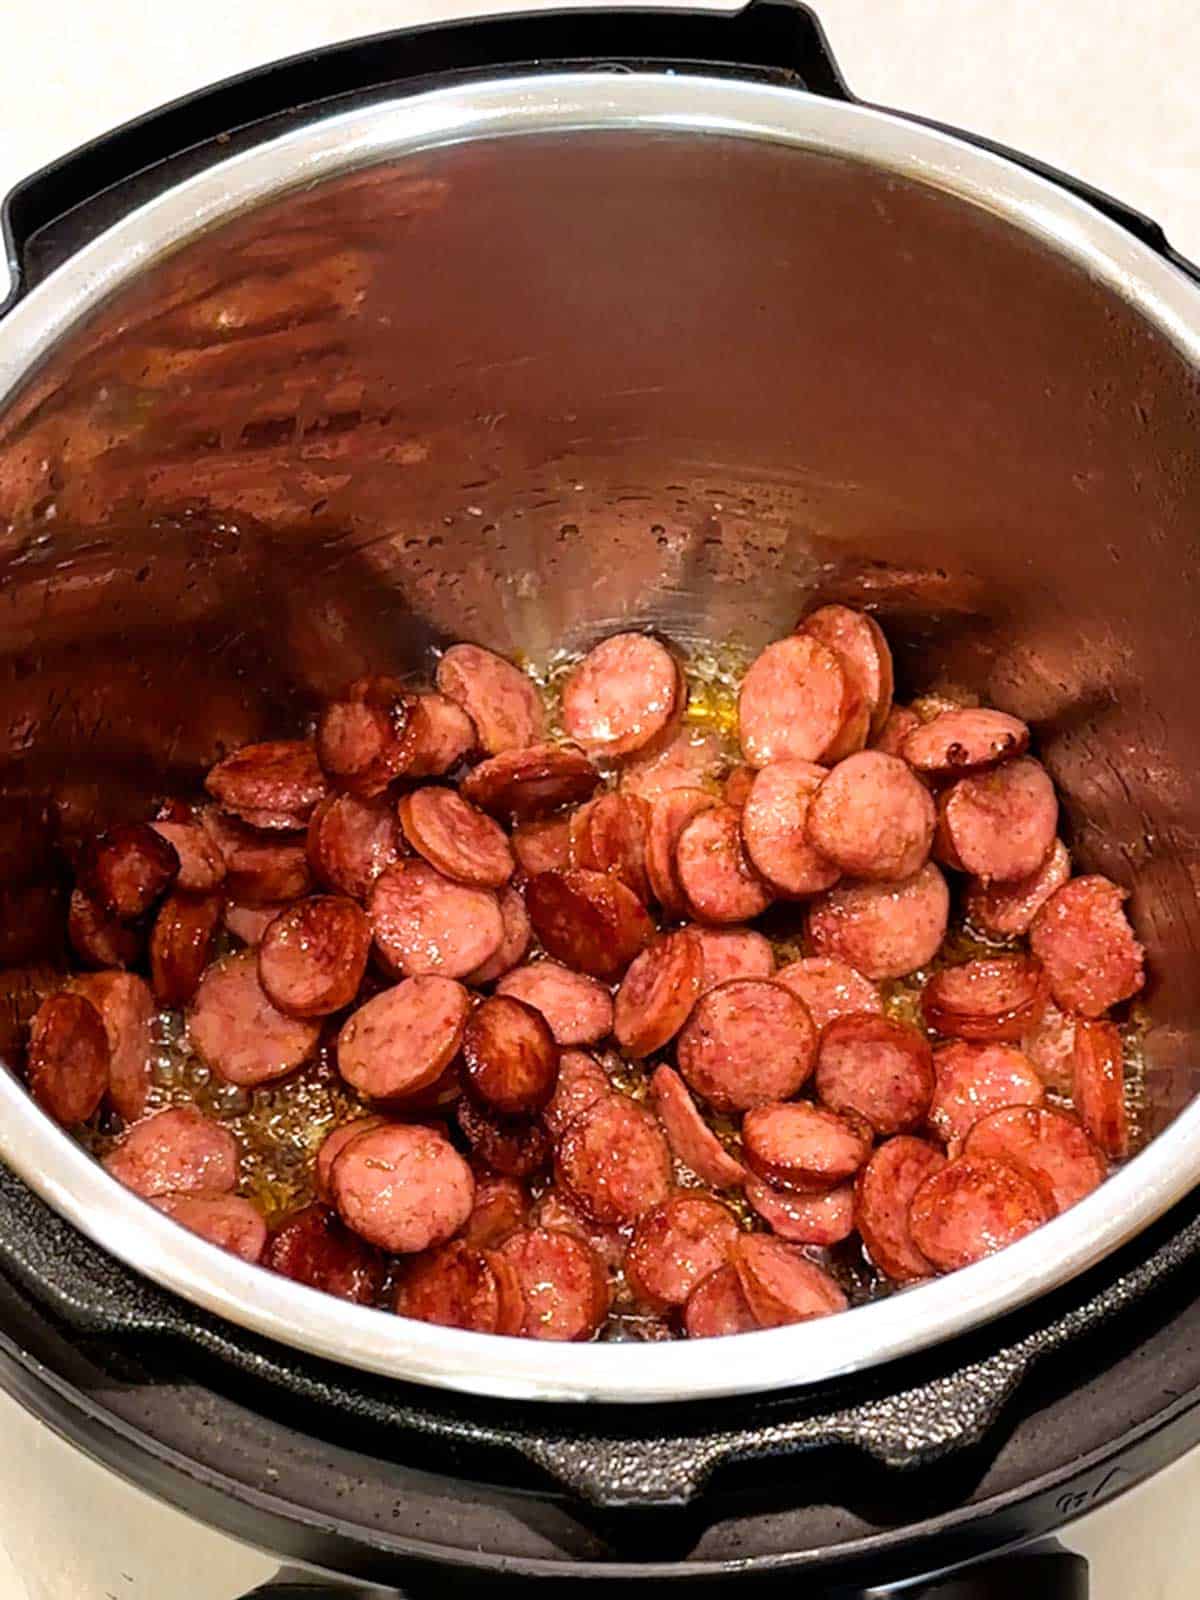 Cooking smoked sausage in the Instant Pot.